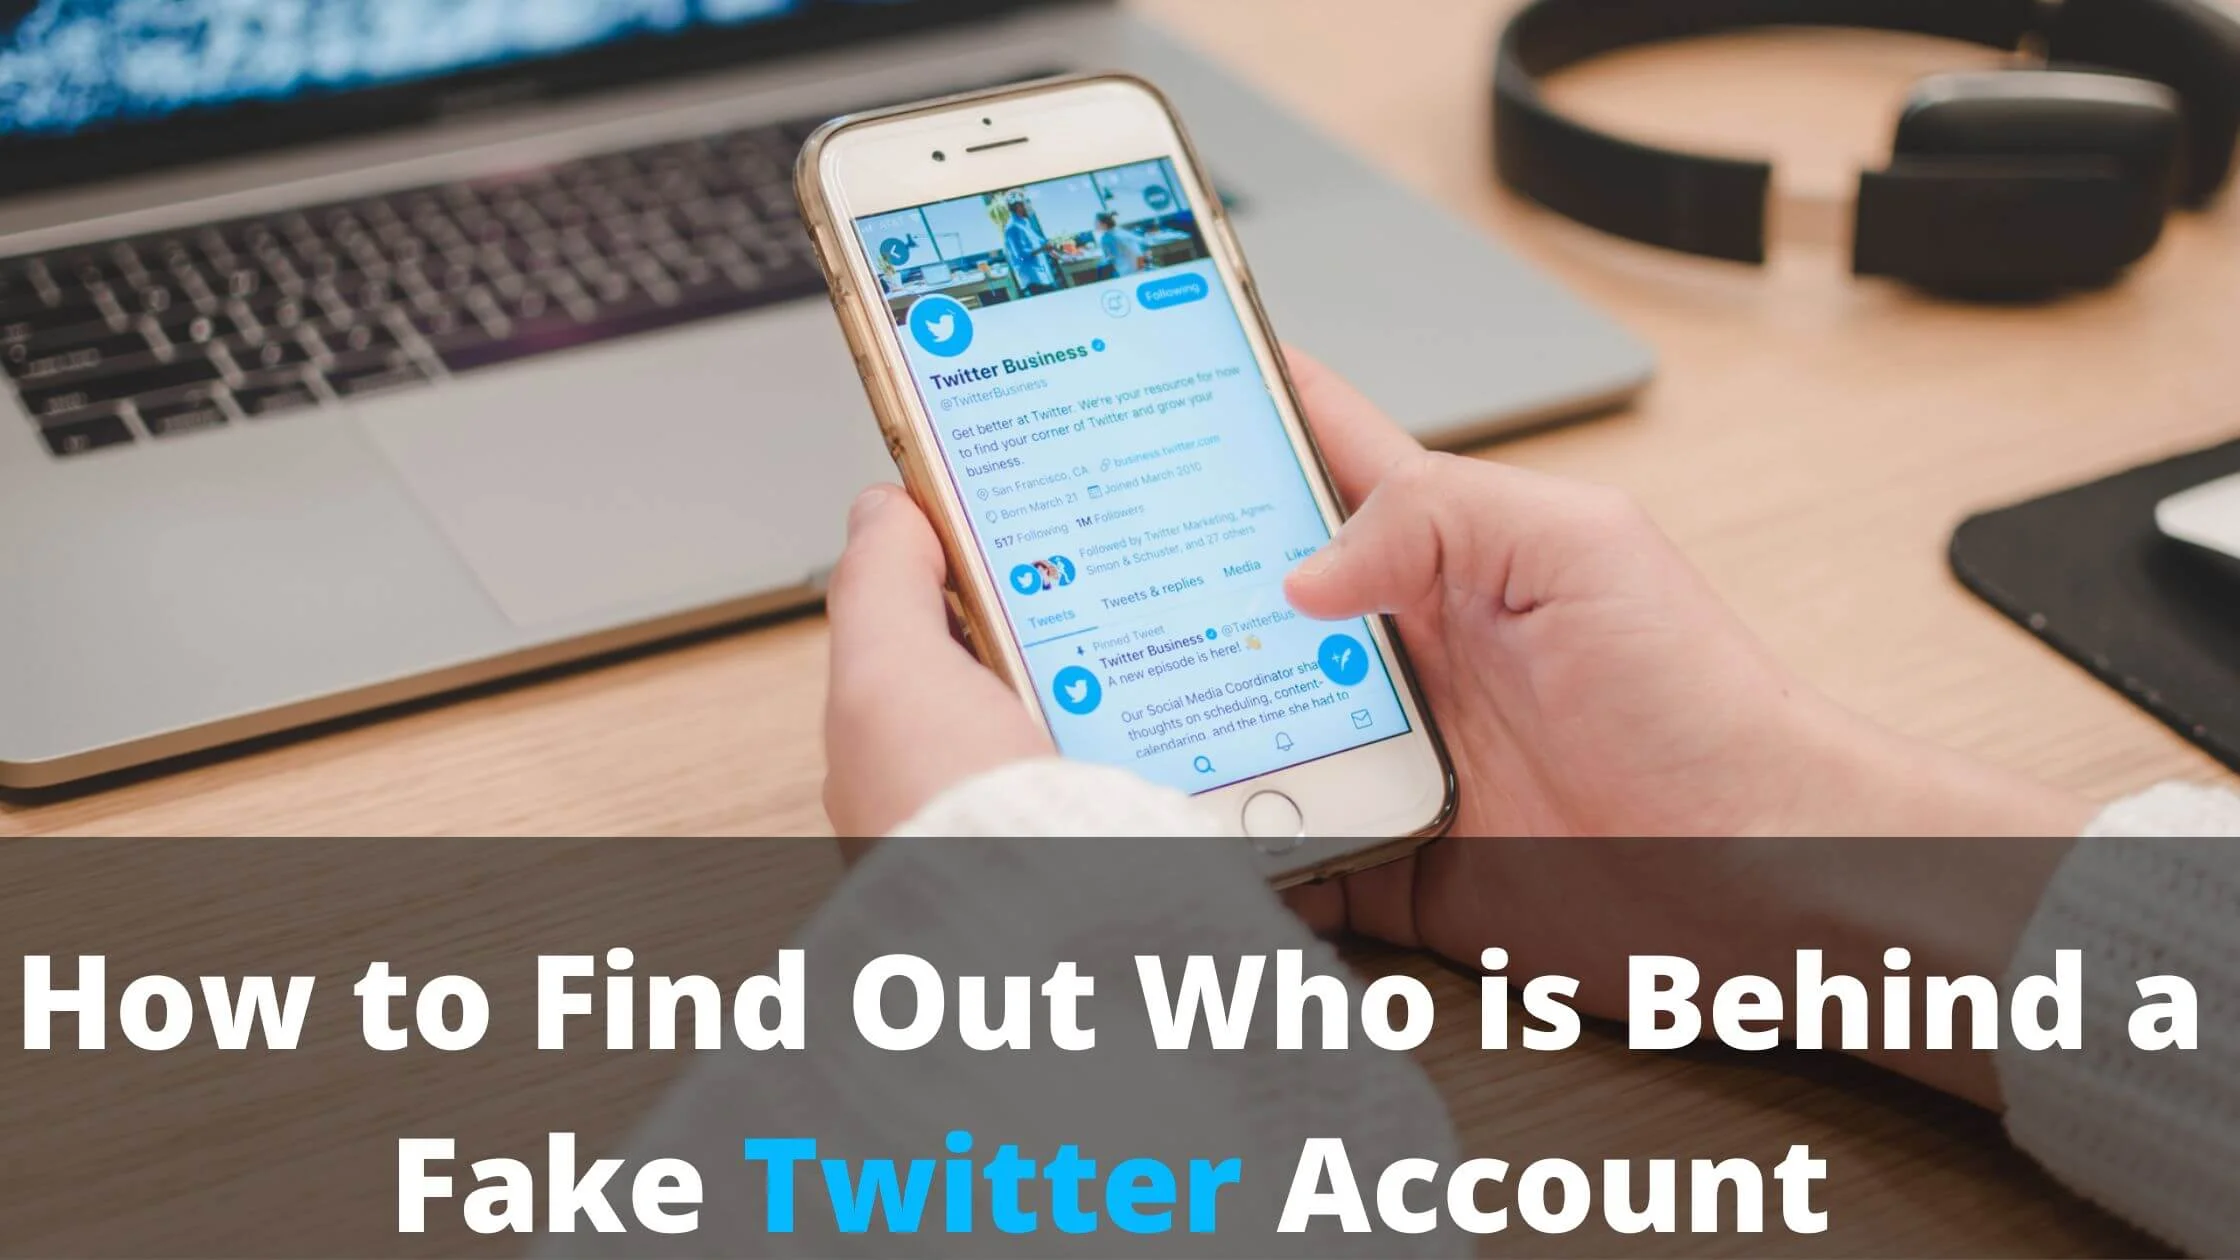 Find Out Who is Behind a Fake Twitter Account